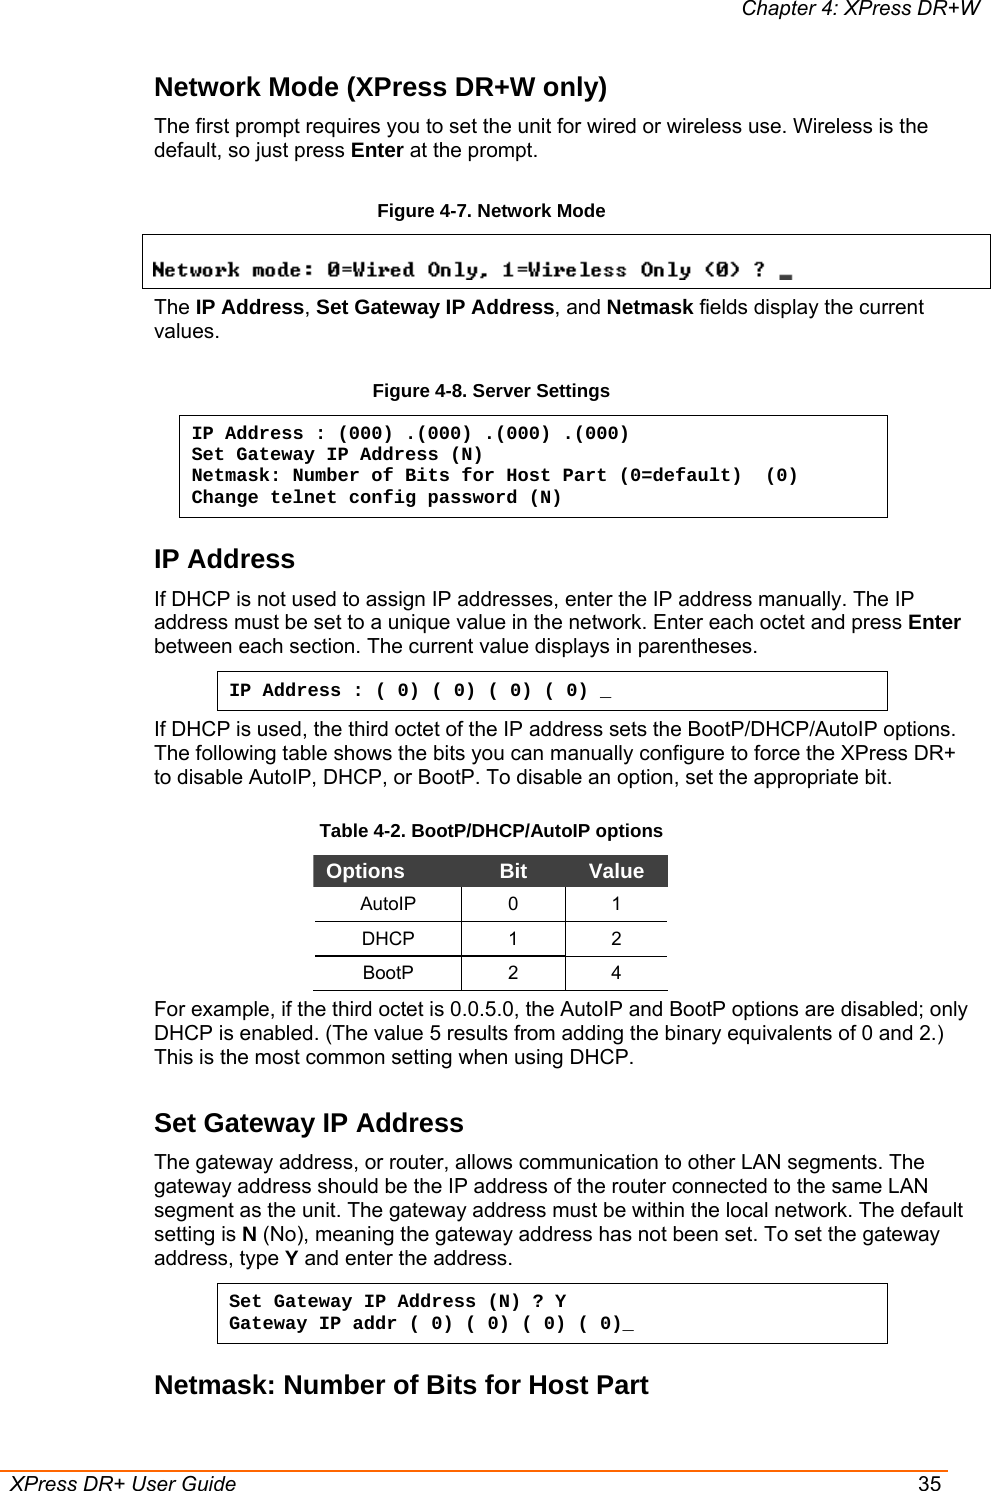 Chapter 4: XPress DR+W  XPress DR+ User Guide  35 Network Mode (XPress DR+W only) The first prompt requires you to set the unit for wired or wireless use. Wireless is the default, so just press Enter at the prompt.  Figure 4-7. Network Mode  The IP Address, Set Gateway IP Address, and Netmask fields display the current values. Figure 4-8. Server Settings IP Address : (000) .(000) .(000) .(000) Set Gateway IP Address (N) Netmask: Number of Bits for Host Part (0=default)  (0) Change telnet config password (N) IP Address  If DHCP is not used to assign IP addresses, enter the IP address manually. The IP address must be set to a unique value in the network. Enter each octet and press Enter between each section. The current value displays in parentheses. IP Address : ( 0) ( 0) ( 0) ( 0) _ If DHCP is used, the third octet of the IP address sets the BootP/DHCP/AutoIP options. The following table shows the bits you can manually configure to force the XPress DR+ to disable AutoIP, DHCP, or BootP. To disable an option, set the appropriate bit. Table 4-2. BootP/DHCP/AutoIP options Options  Bit  Value AutoIP 0 1 DHCP 1 2 BootP 2 4 For example, if the third octet is 0.0.5.0, the AutoIP and BootP options are disabled; only DHCP is enabled. (The value 5 results from adding the binary equivalents of 0 and 2.) This is the most common setting when using DHCP. Set Gateway IP Address  The gateway address, or router, allows communication to other LAN segments. The gateway address should be the IP address of the router connected to the same LAN segment as the unit. The gateway address must be within the local network. The default setting is N (No), meaning the gateway address has not been set. To set the gateway address, type Y and enter the address. Set Gateway IP Address (N) ? Y Gateway IP addr ( 0) ( 0) ( 0) ( 0)_  Netmask: Number of Bits for Host Part 